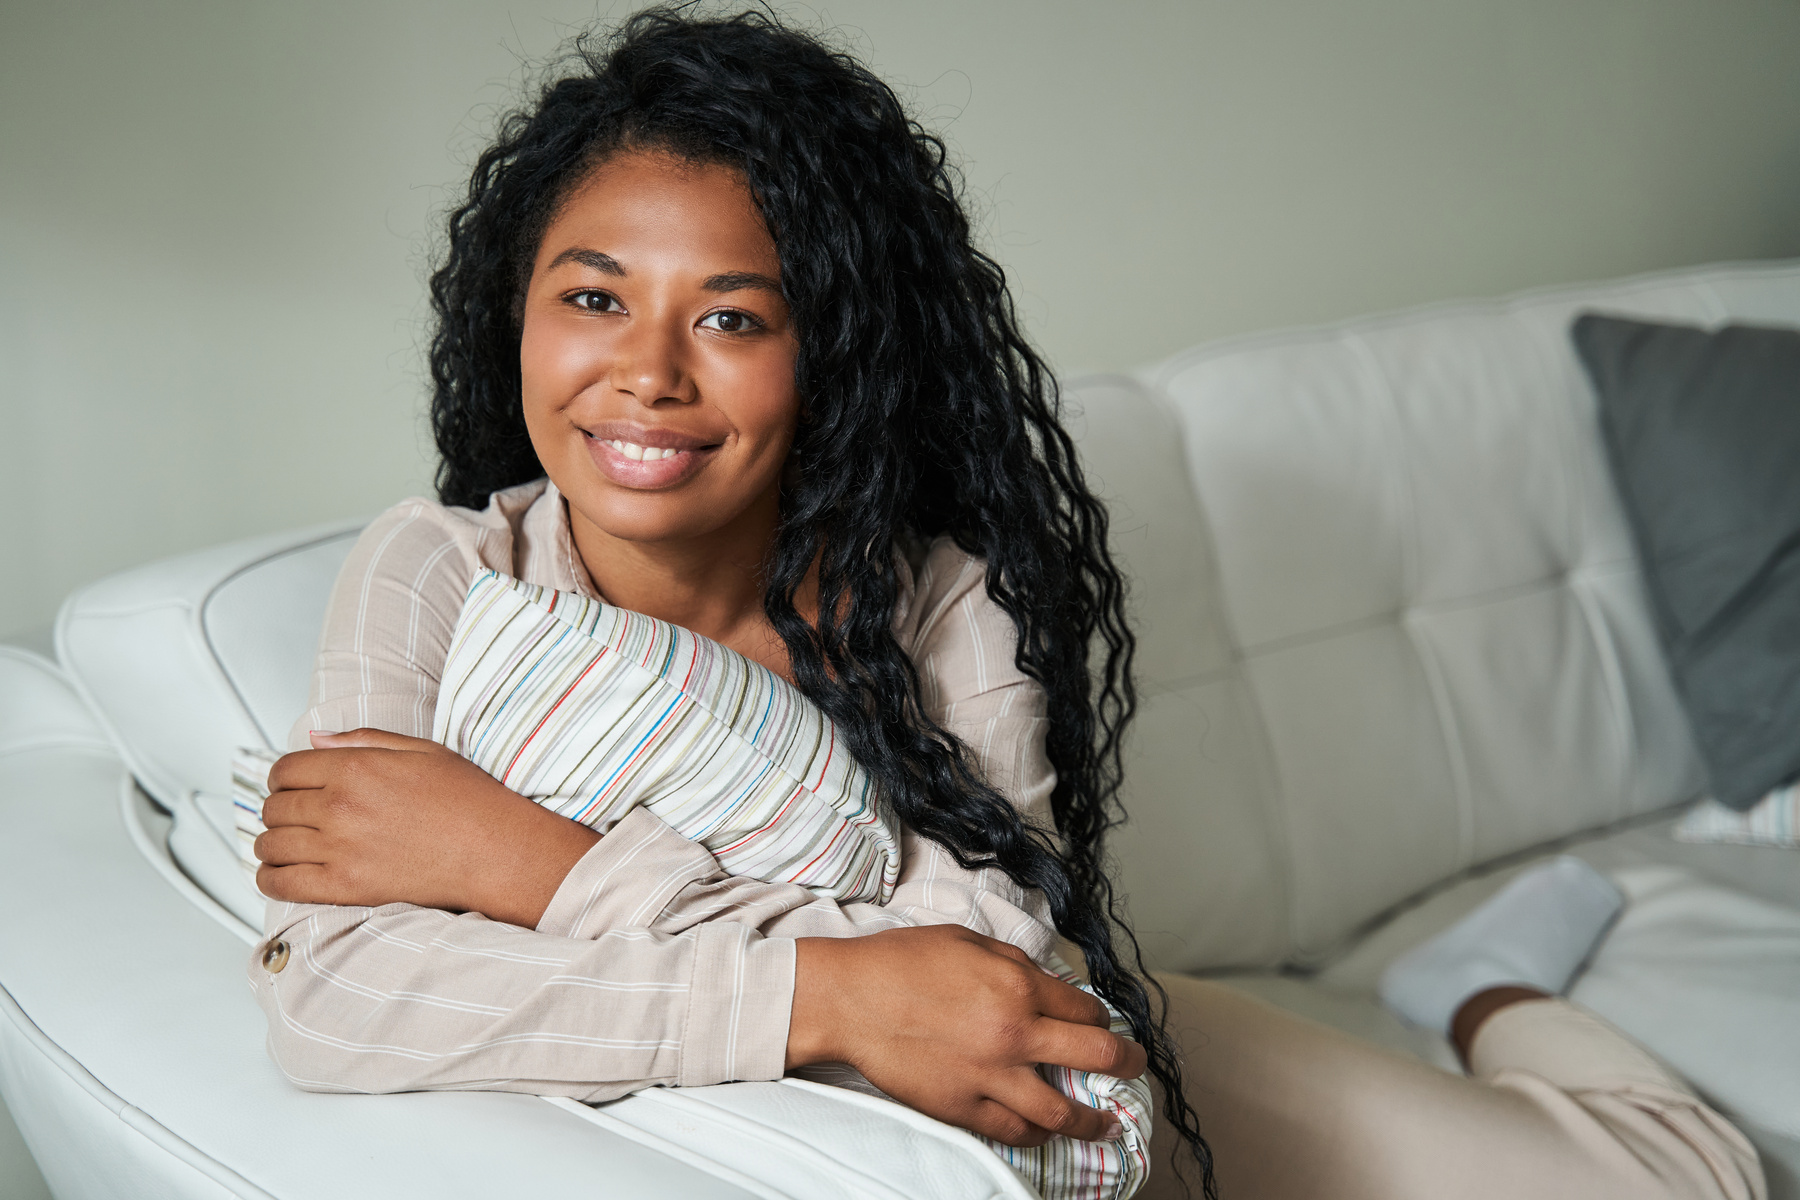 Black woman sitting on couch and looking at camera